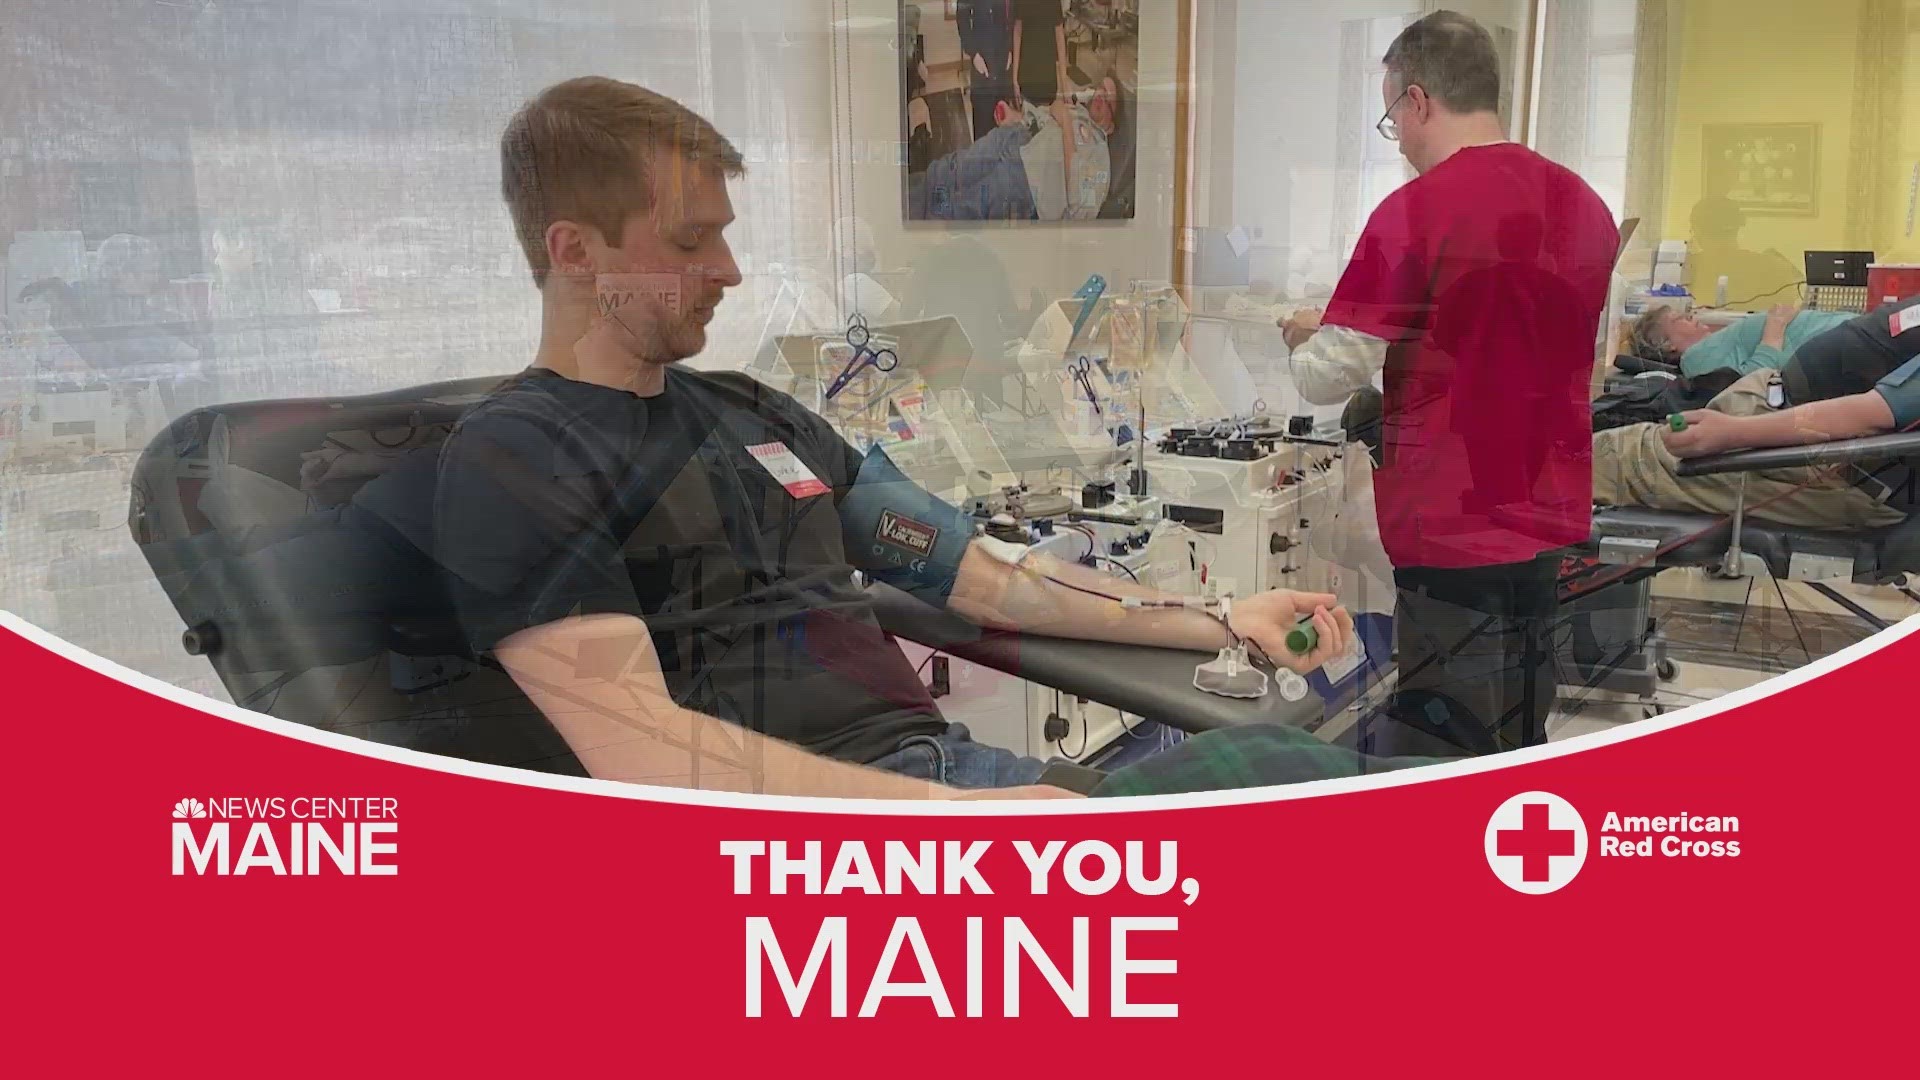 Thanks to the generosity of Mainers during the Red Cross Blood Drive, 200 units of blood were donated, saving up to 600 lives! Thank you, Maine.